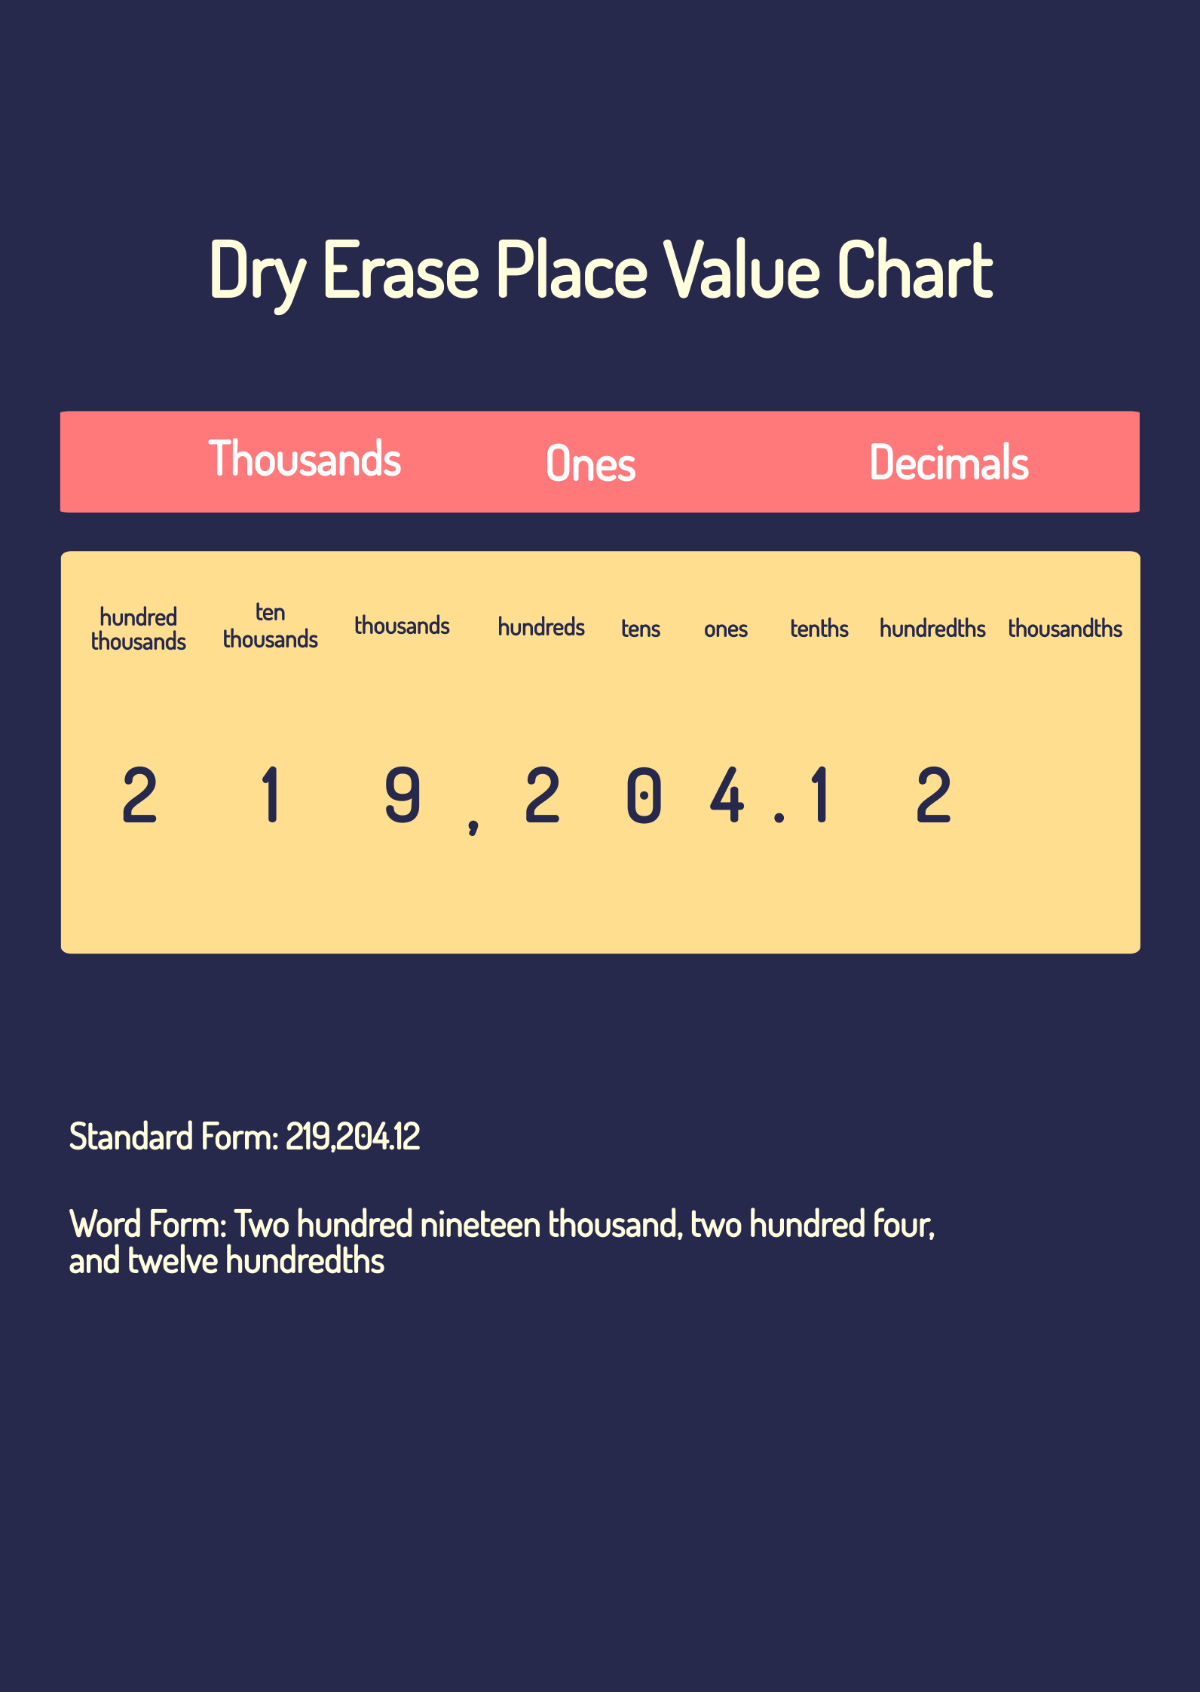 Dry Erase Place Value Chart Template